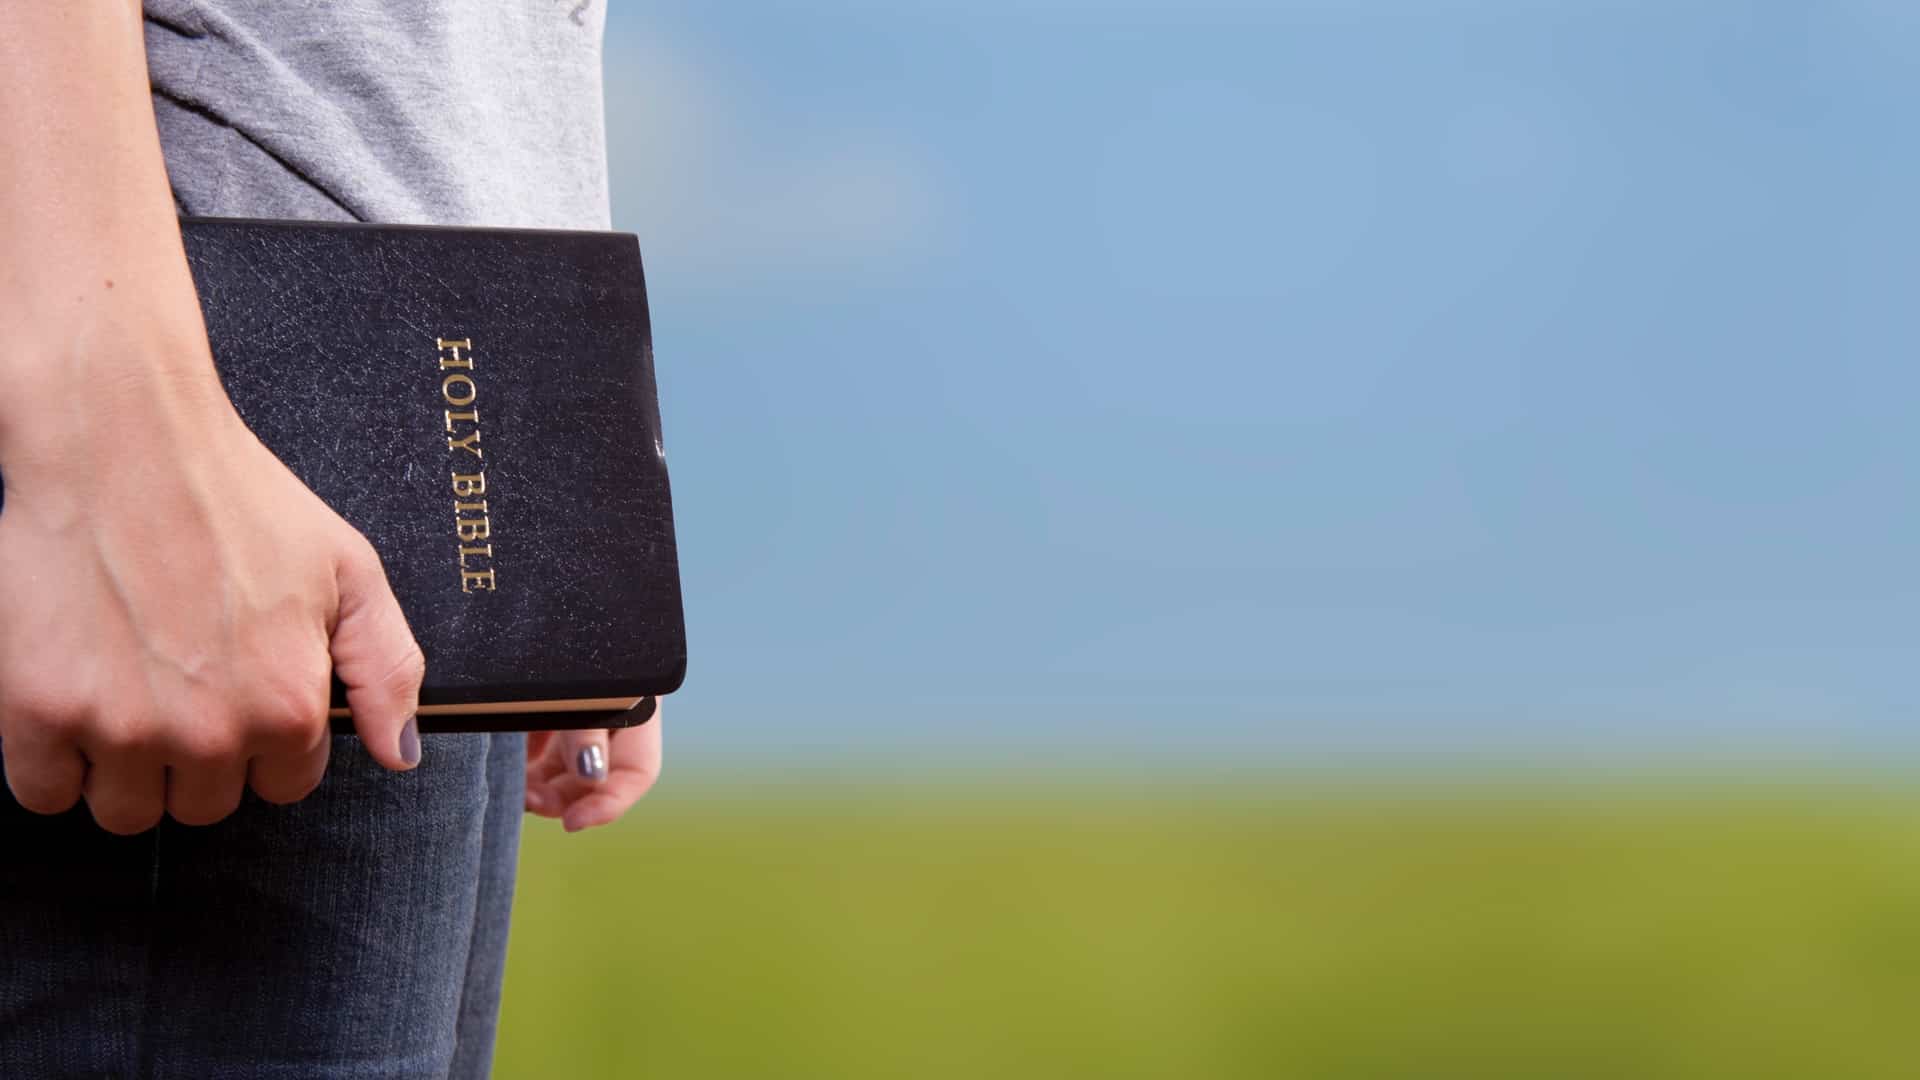 man with Bible